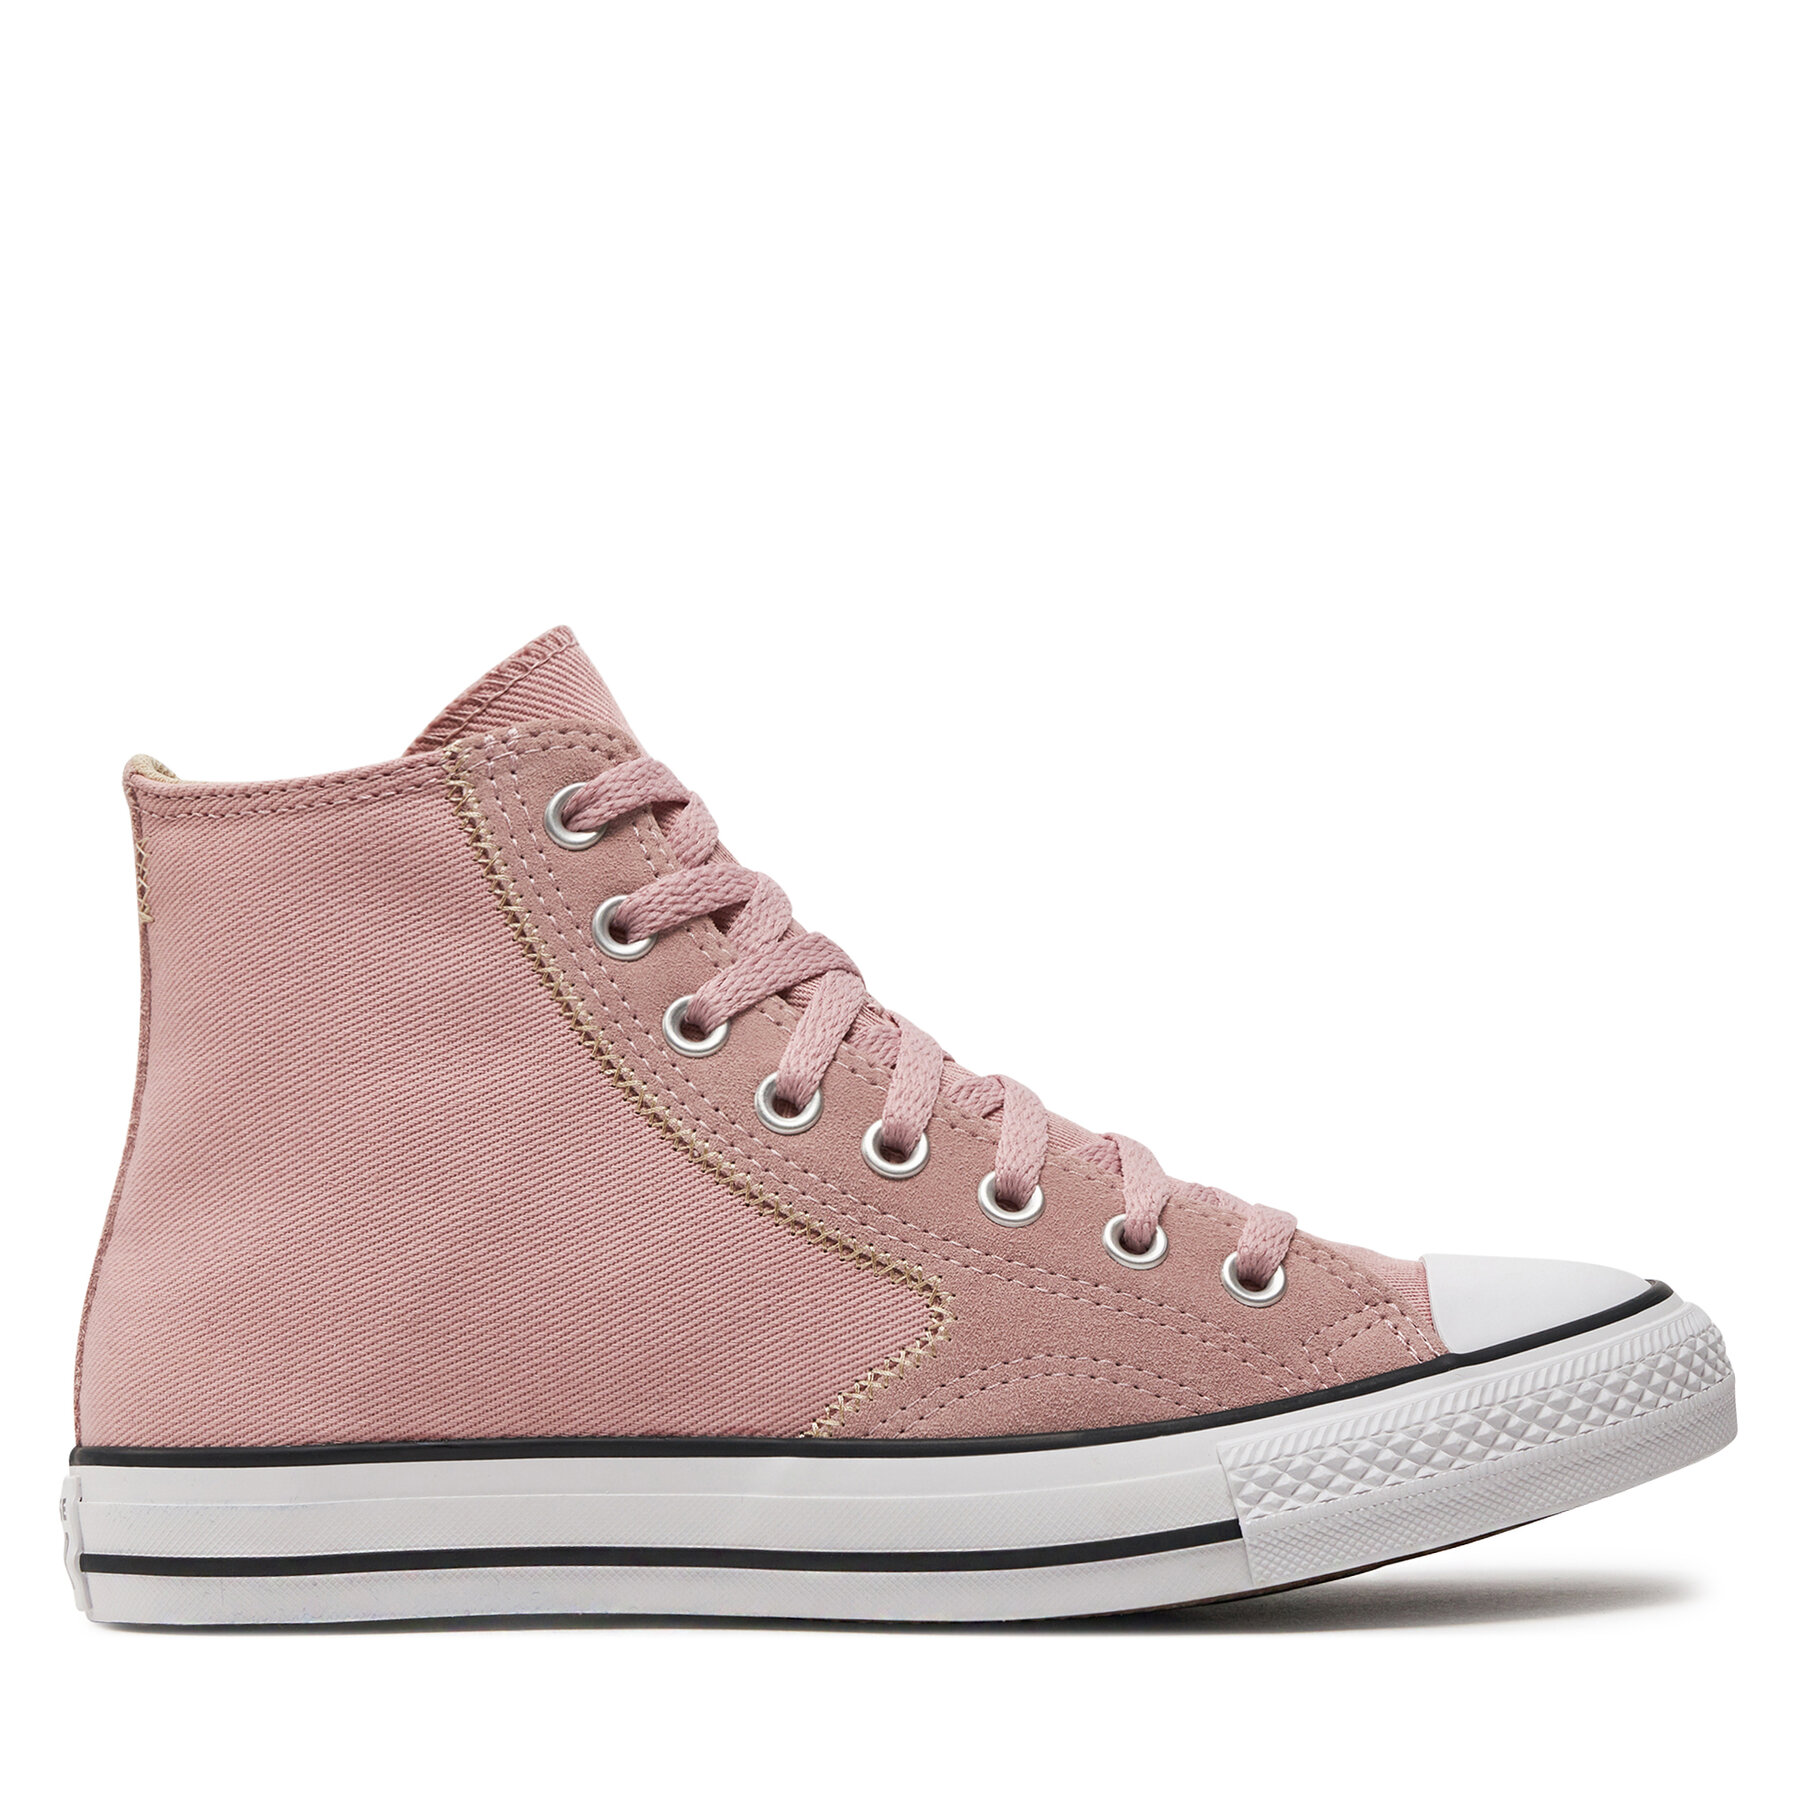 Sneakers aus Stoff Converse Chuck Taylor All Star Mixed Materials A06573C Static Pink/Nutty Granola von Converse